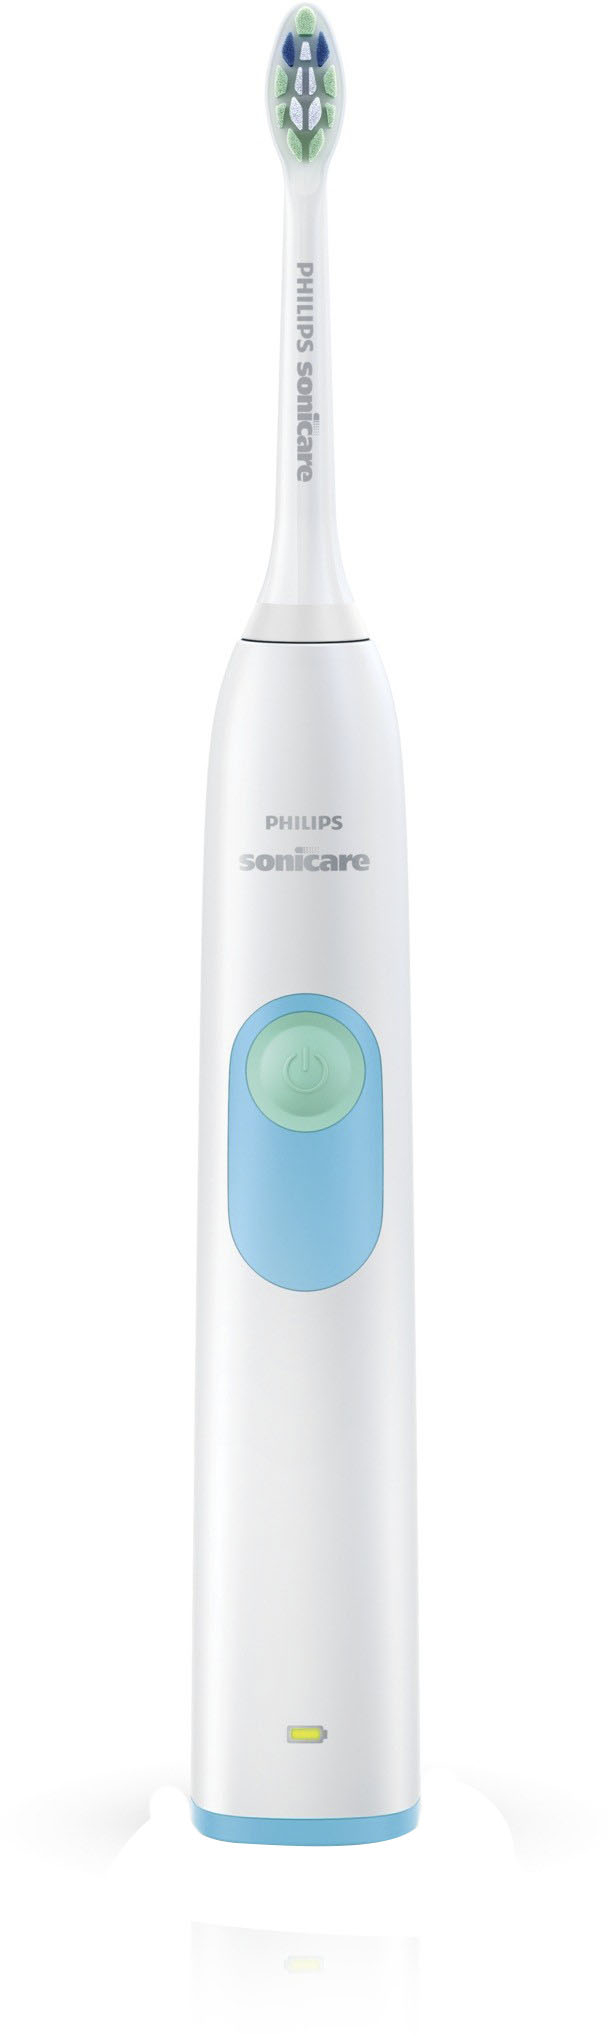 Zoom in on Angle Zoom. Philips Sonicare 2 Series Plaque Control Electric Rechargeable Toothbrush - Teal.